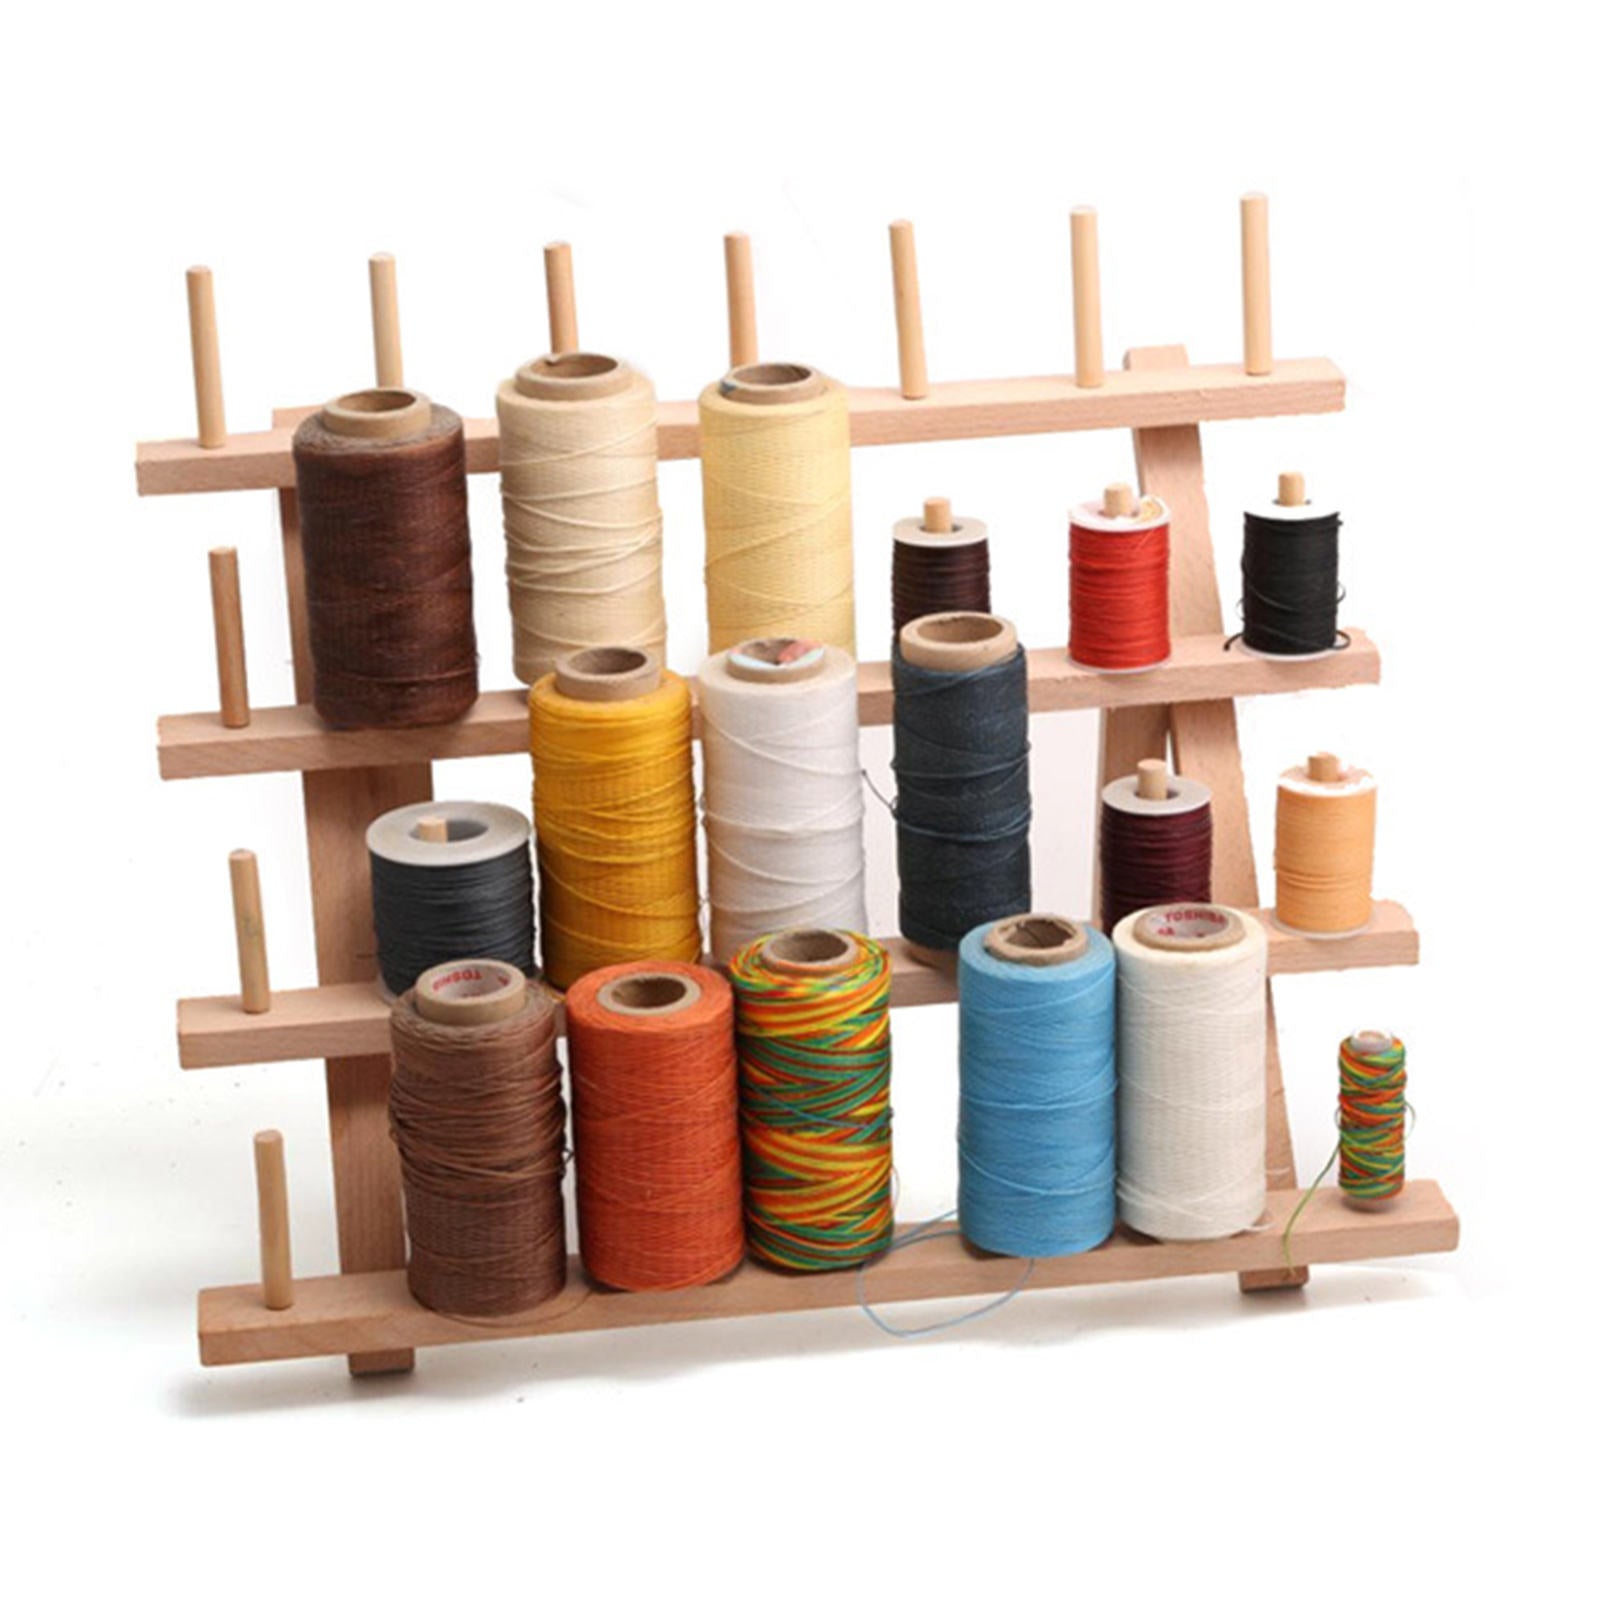 28 Spools Portable Sewing Thread Rack Wooden Holder Shelf Stand Durable